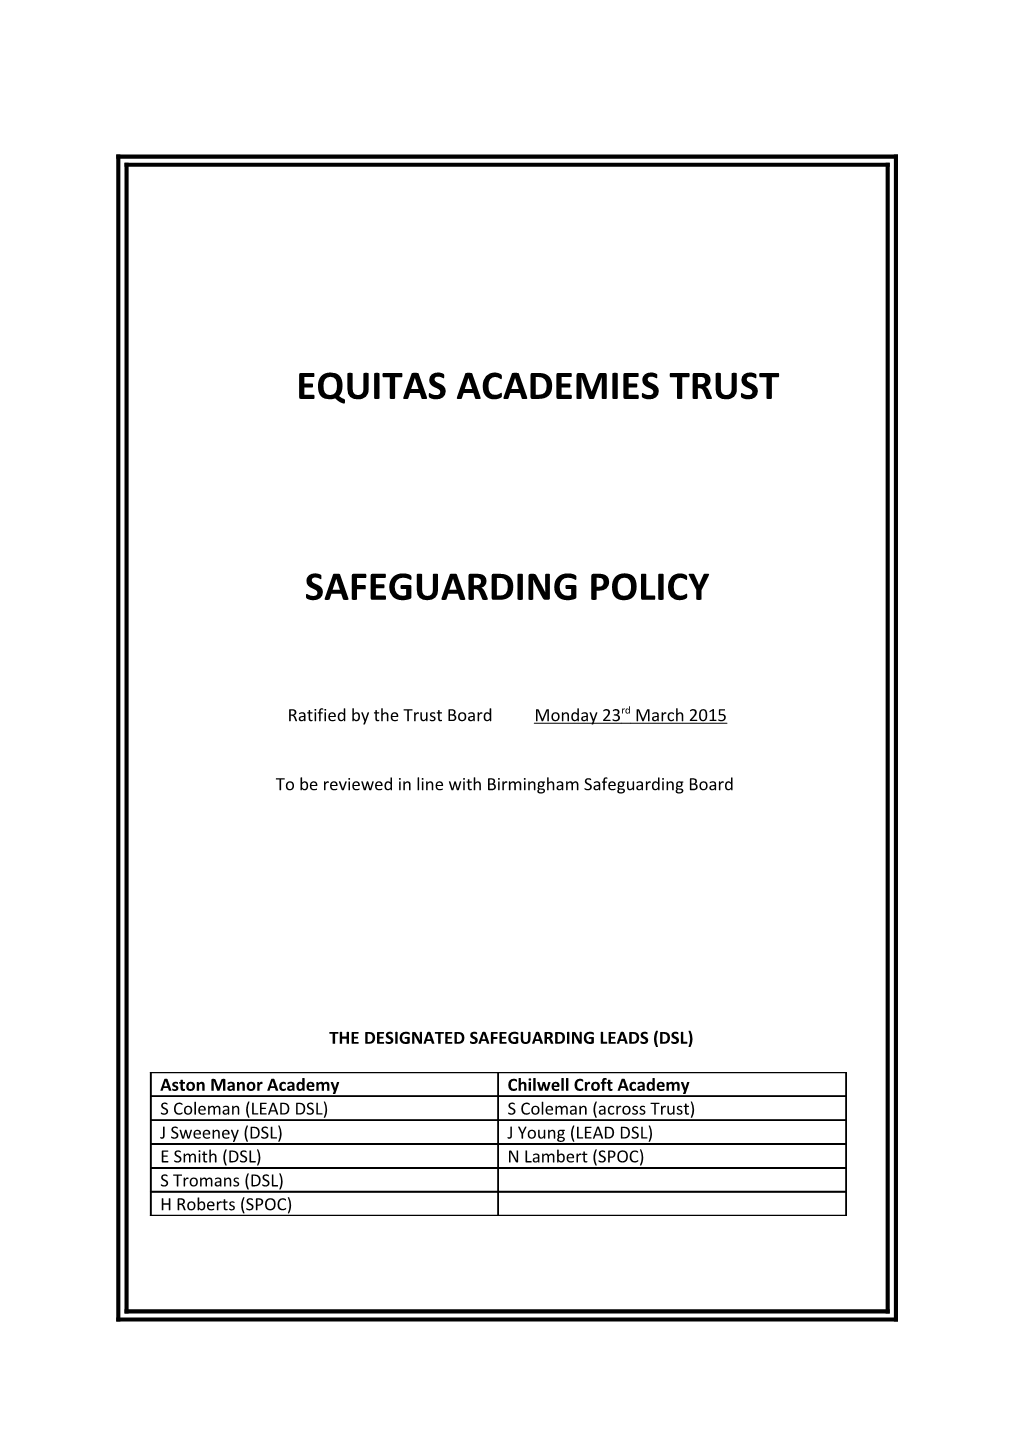 Part One: Safeguarding Policy